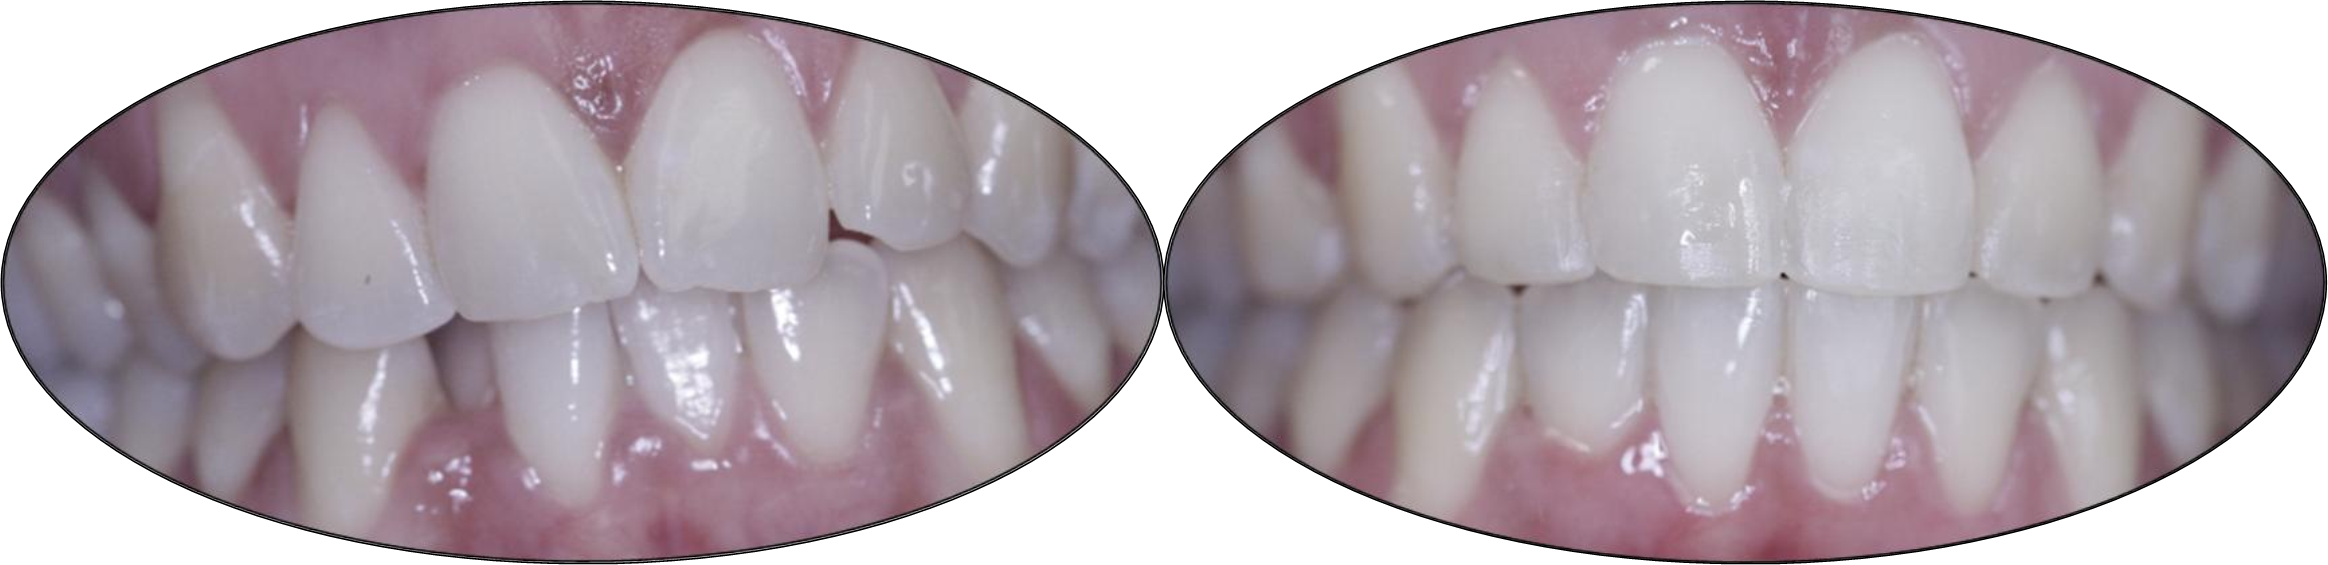 Smile gallery images, before and after orthodontics, patient two